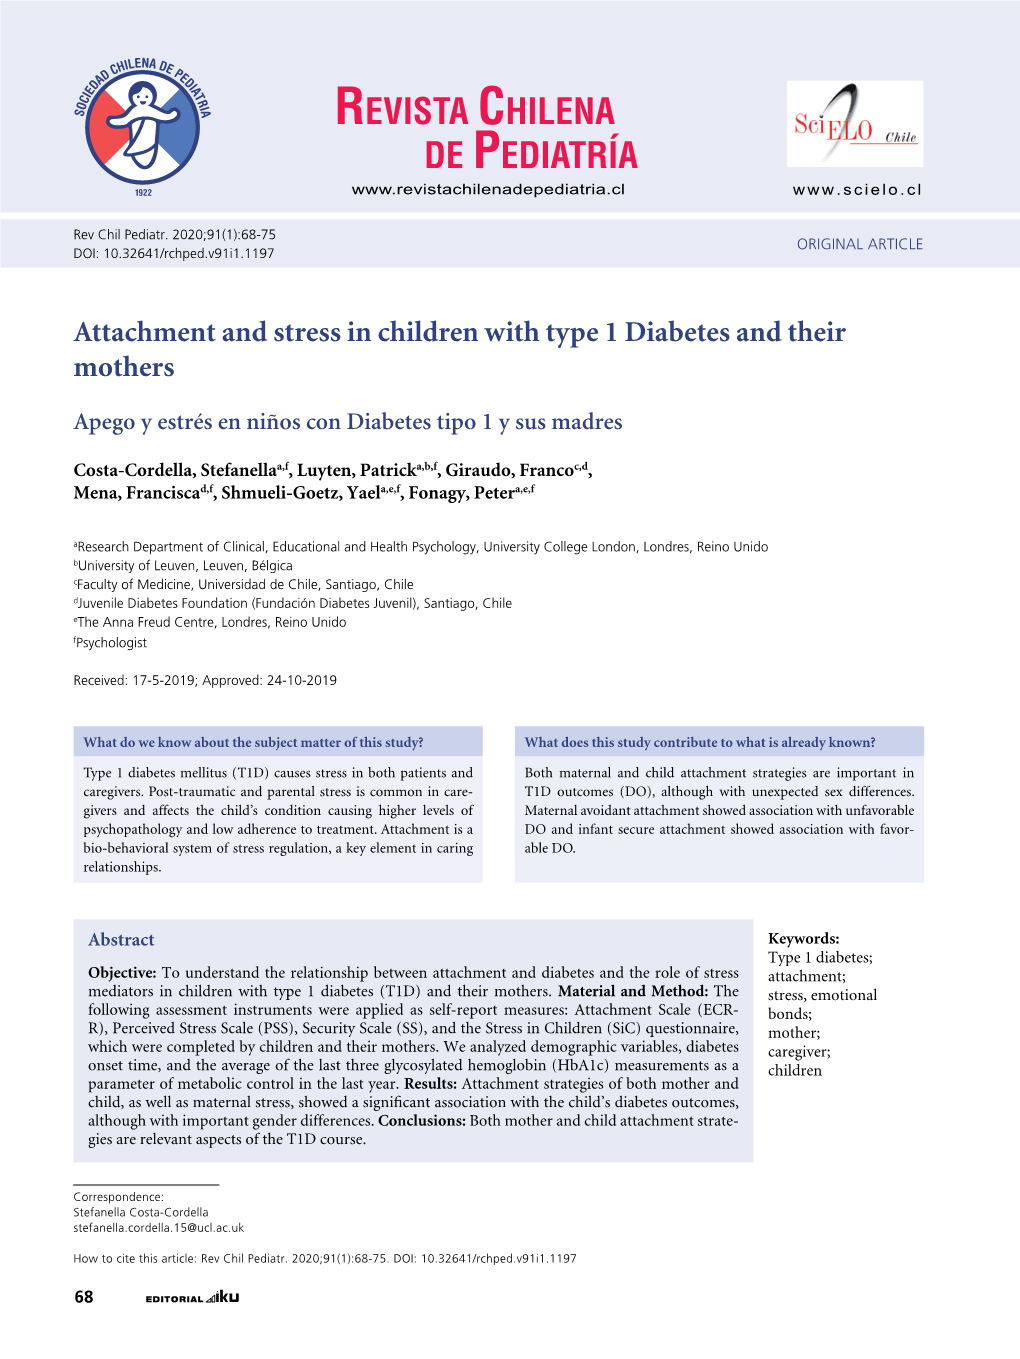 Attachment and Stress in Children with Type 1 Diabetes and Their Mothers